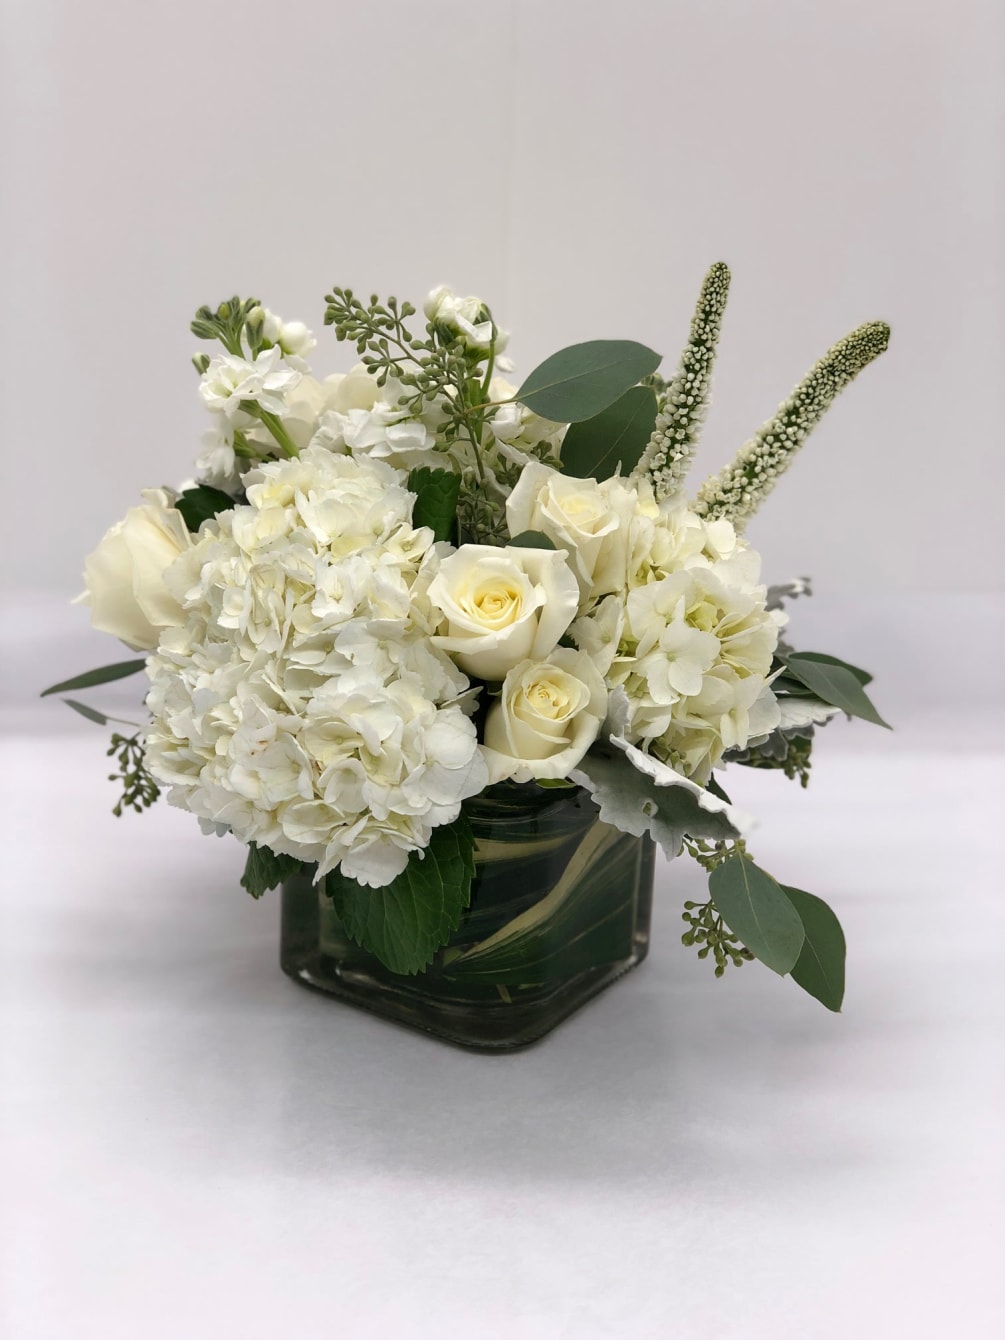 Stunning white and green arrangement that is perfect for any occasion and